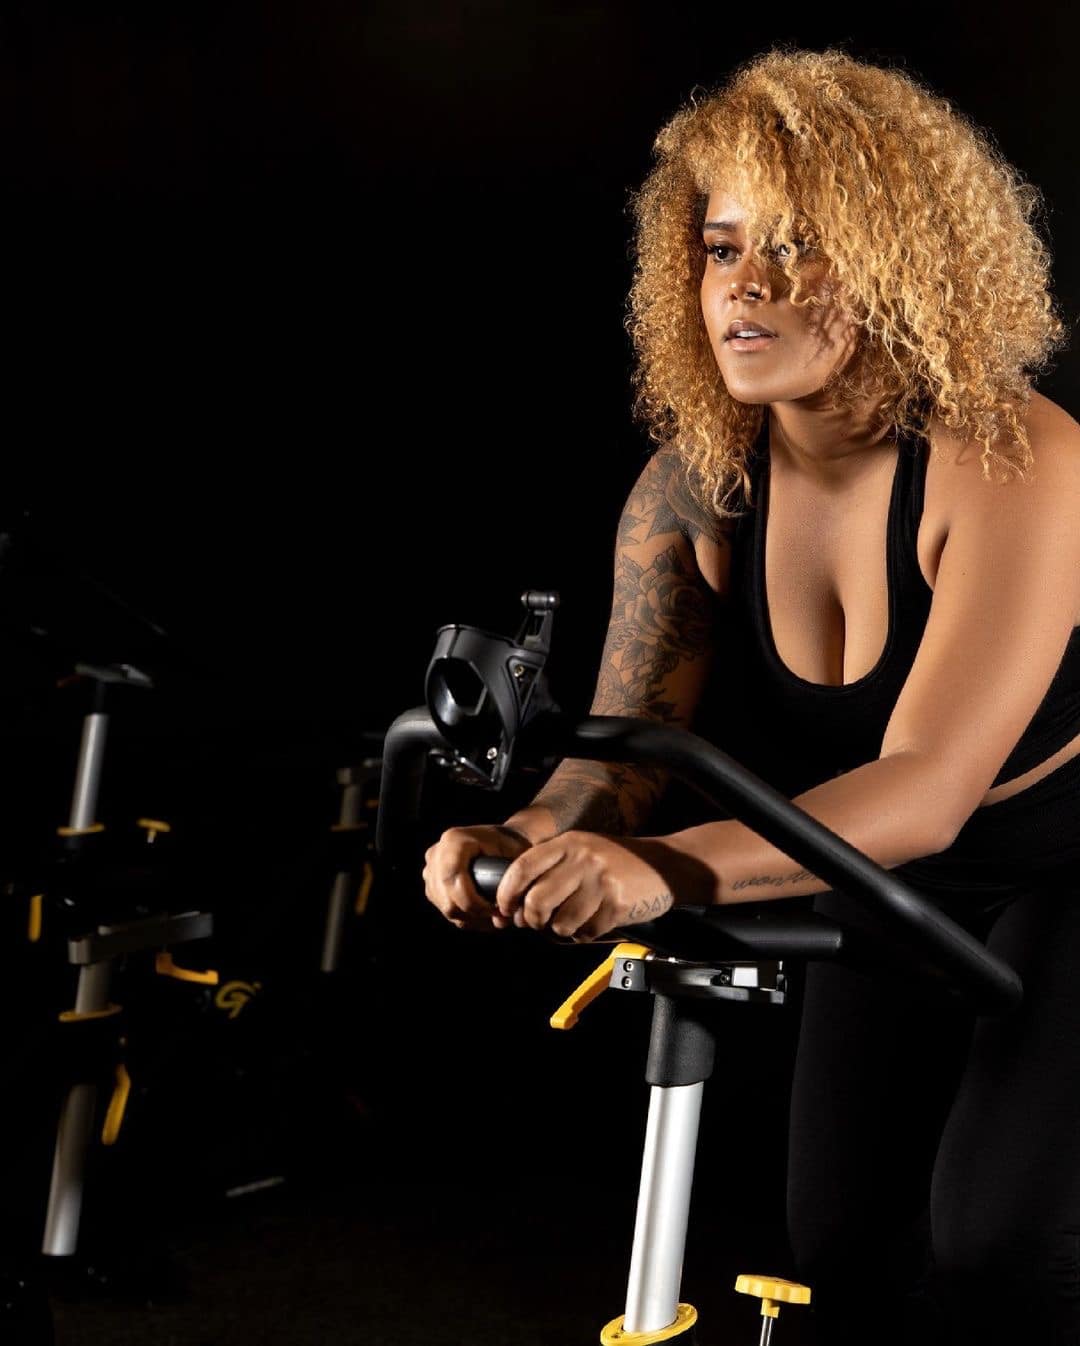 The Top Fitness Influencers to Guide Your Workout - IZEA